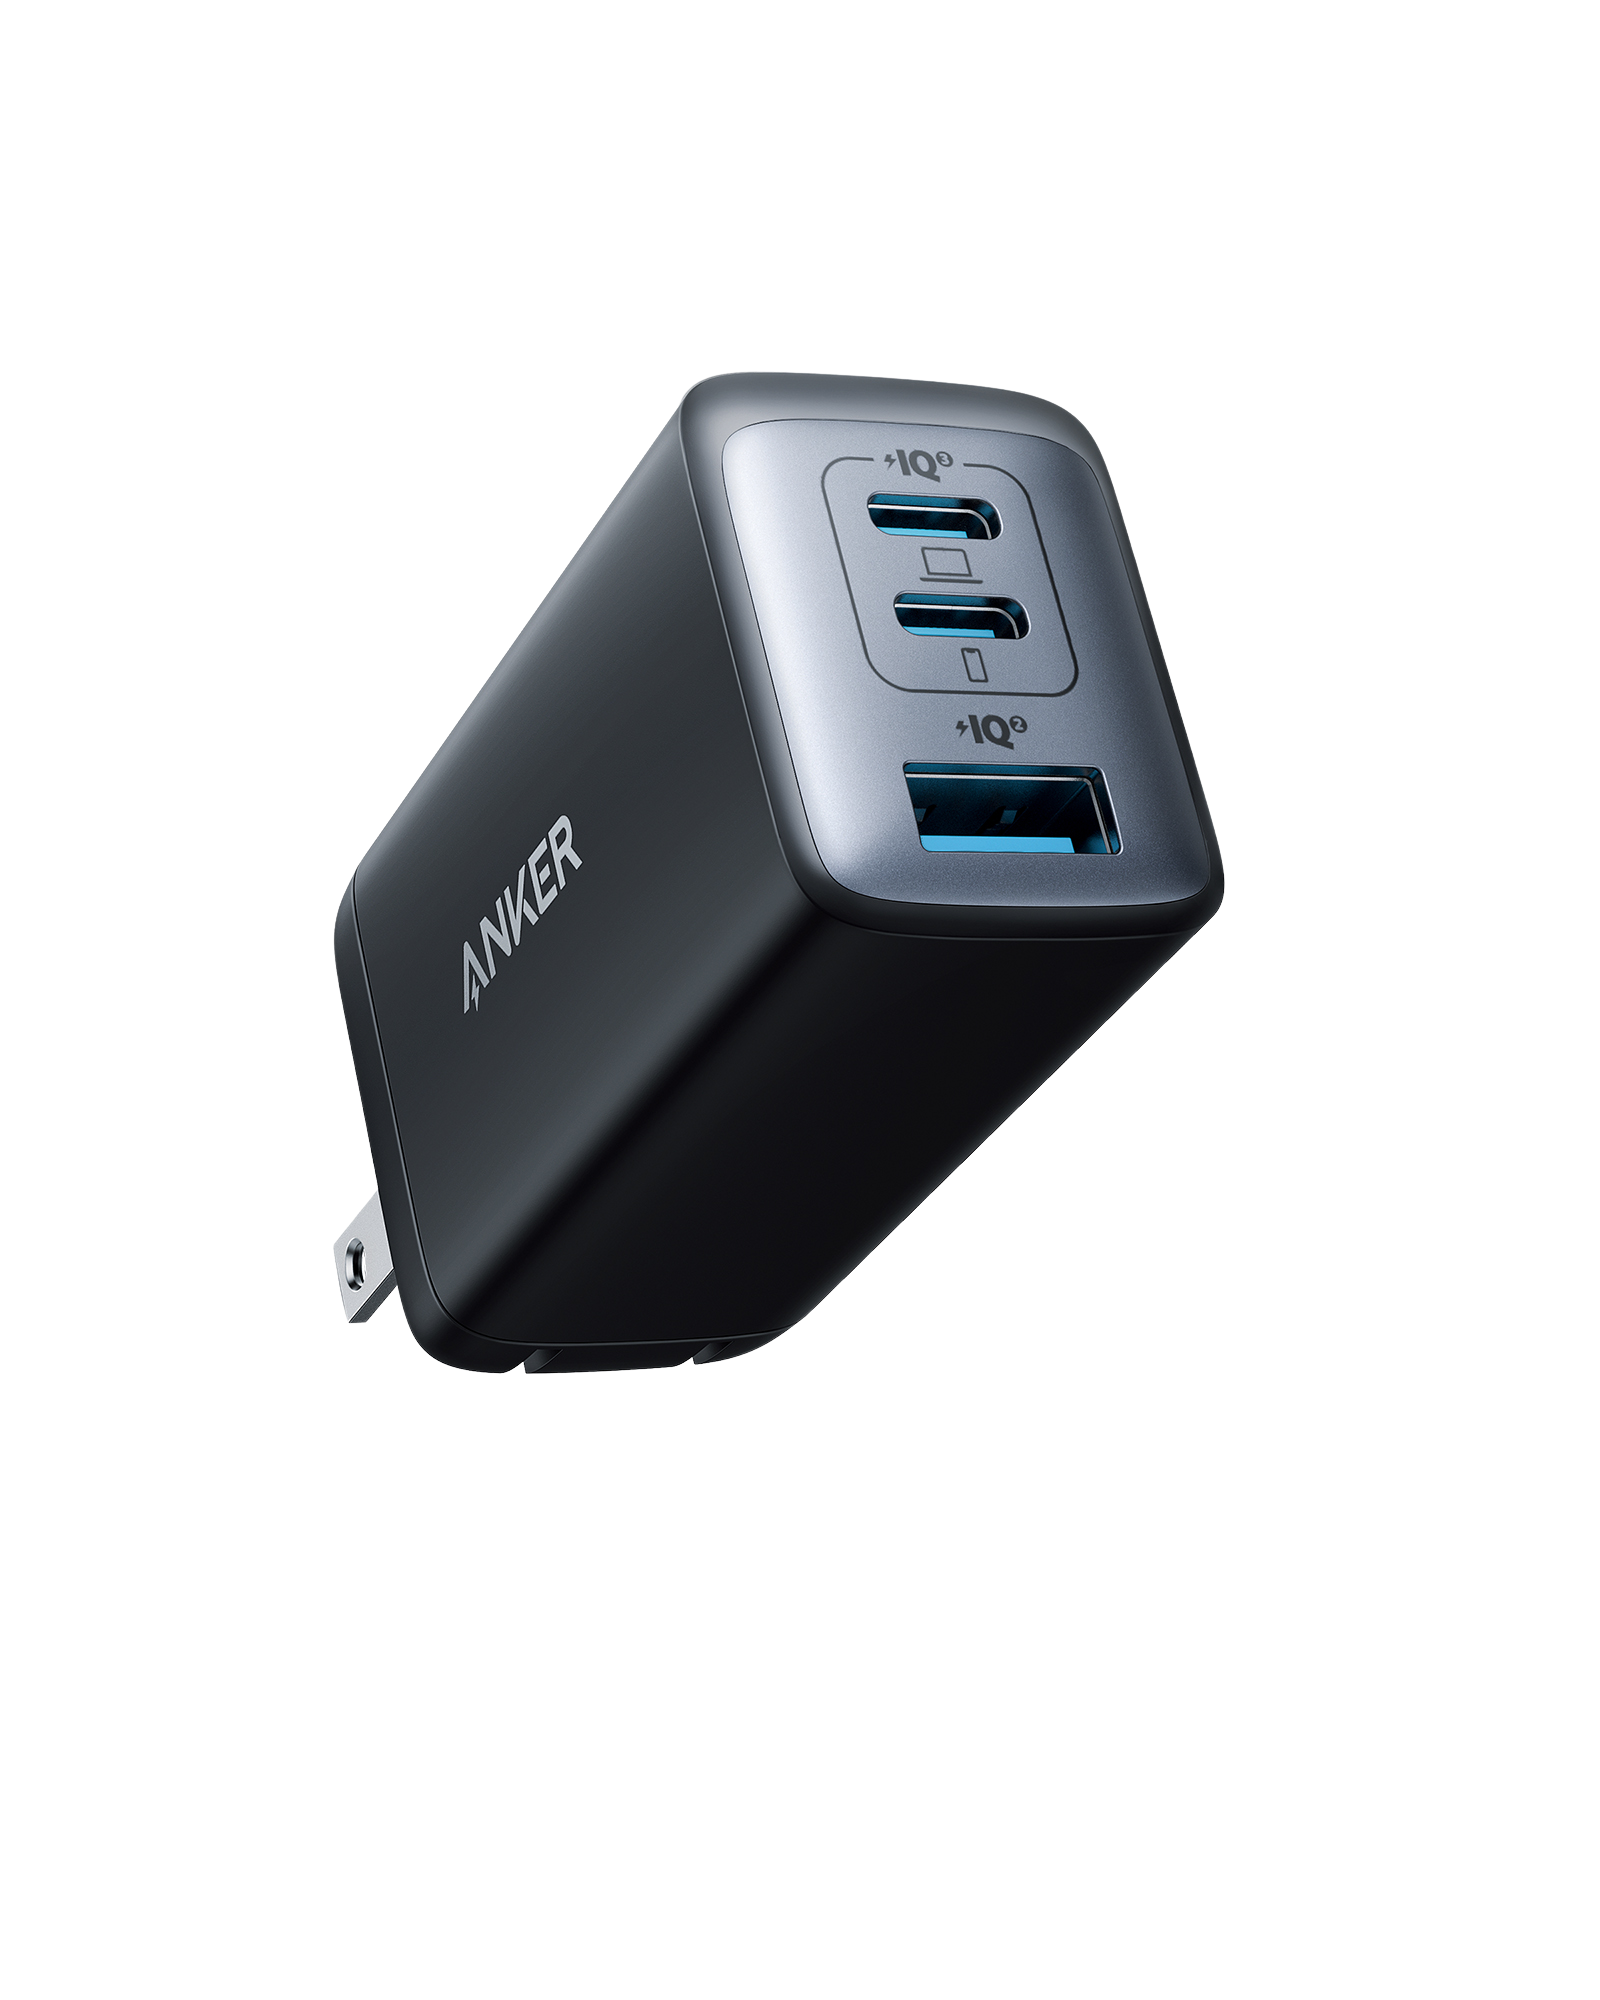 Car Charger, Anker 67W 3-Port Compact Fast Charger - High-Speed Charging  for iPhone 14 Series, Galaxy S23, iPad Air, and More - USB-C to USB-C Cable